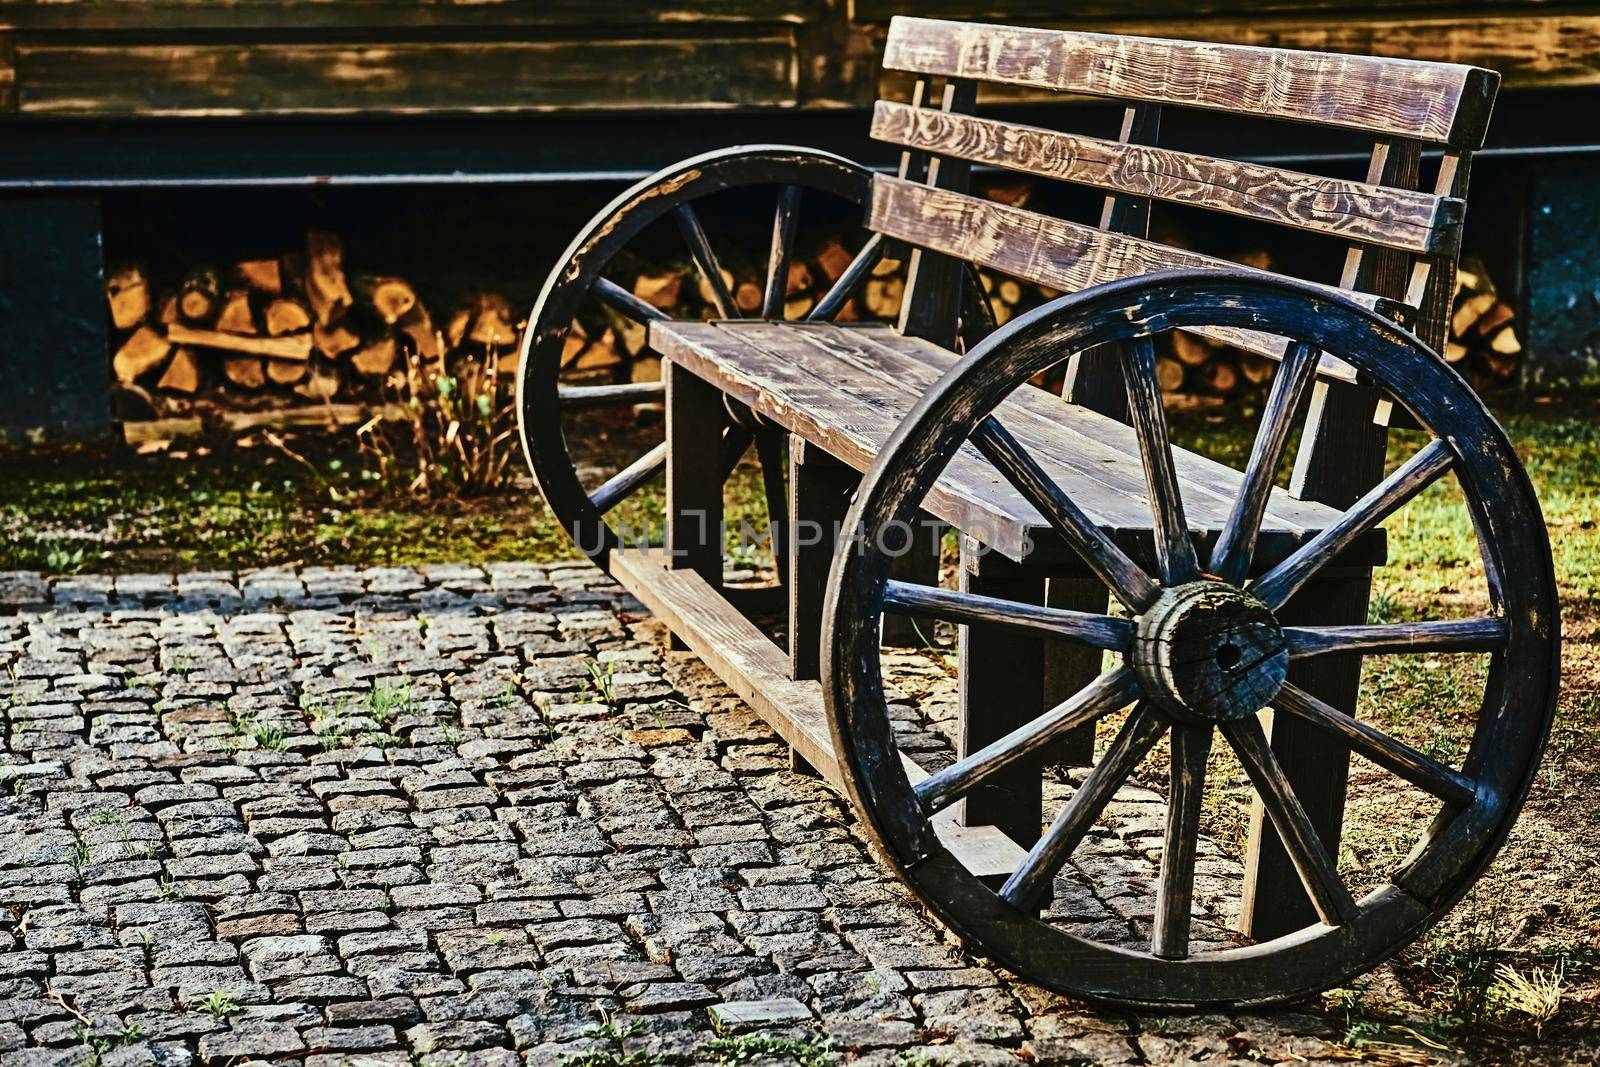 a long seat for several people, typically made of wood or stone. Wooden vintage bench with cart wheels on paving stones.